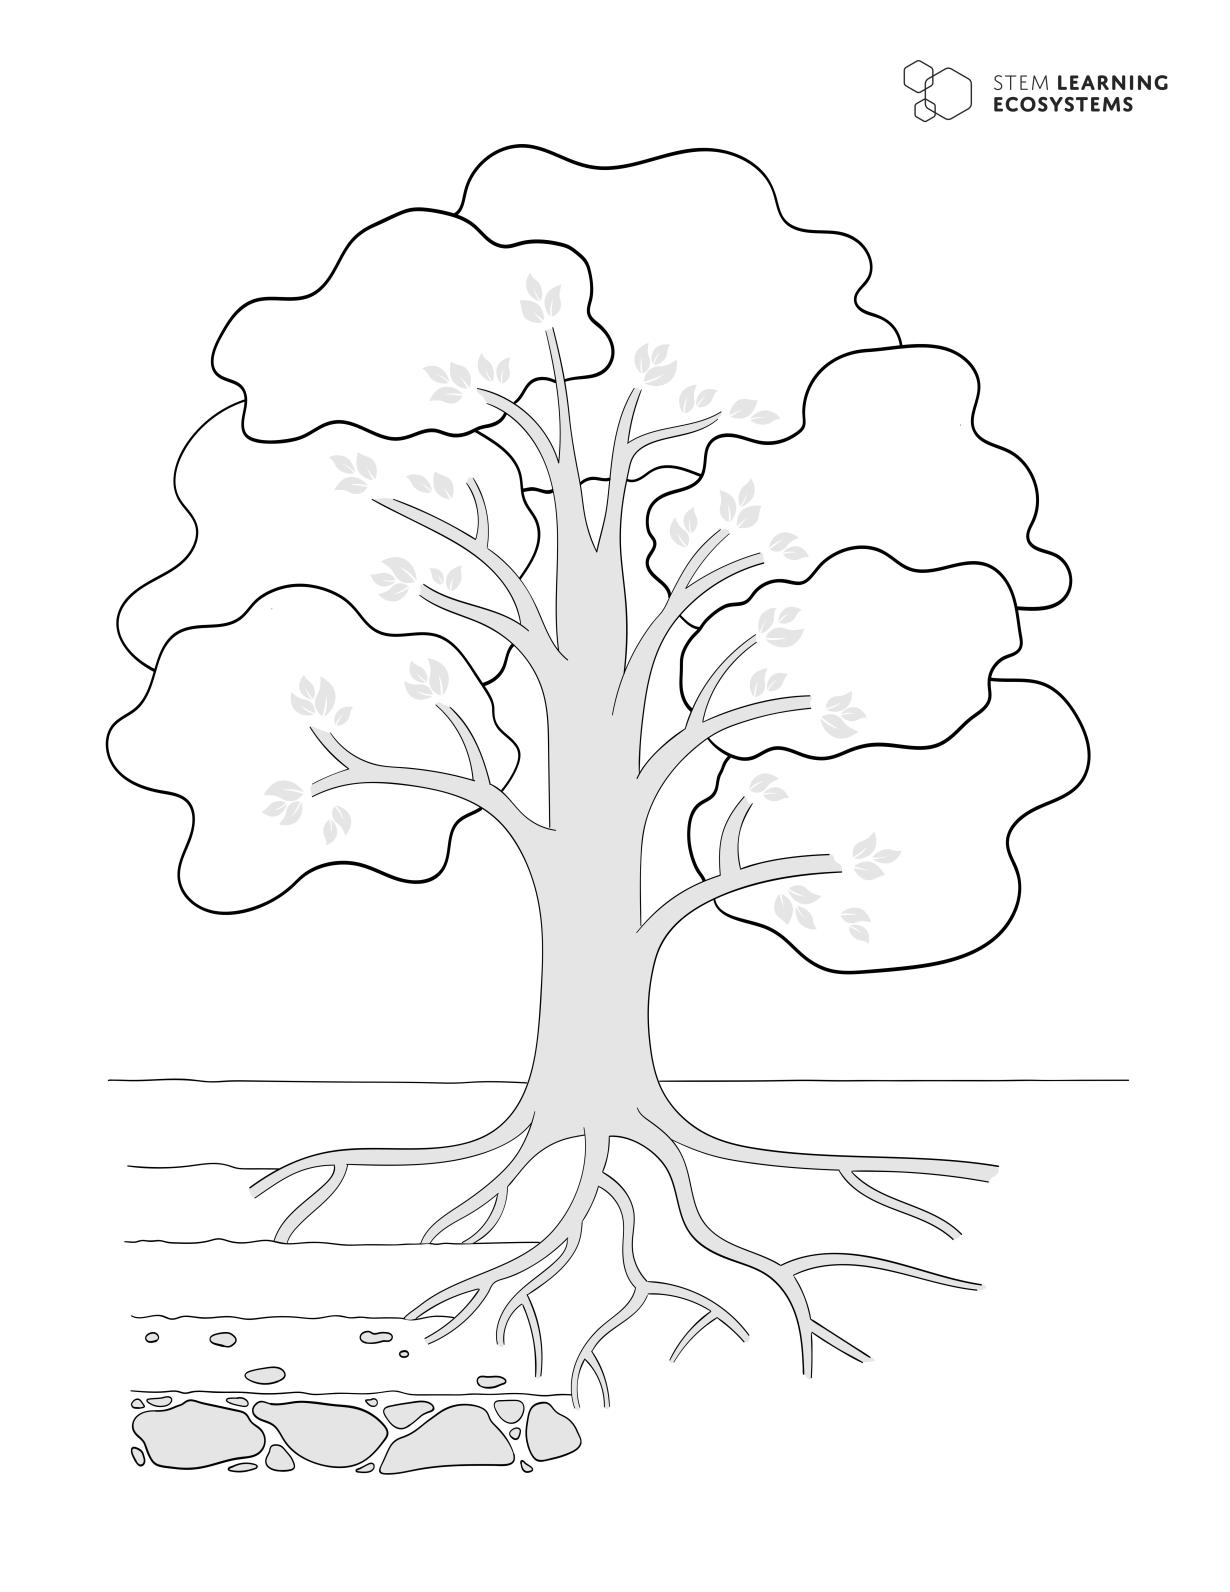 Tree drawing template